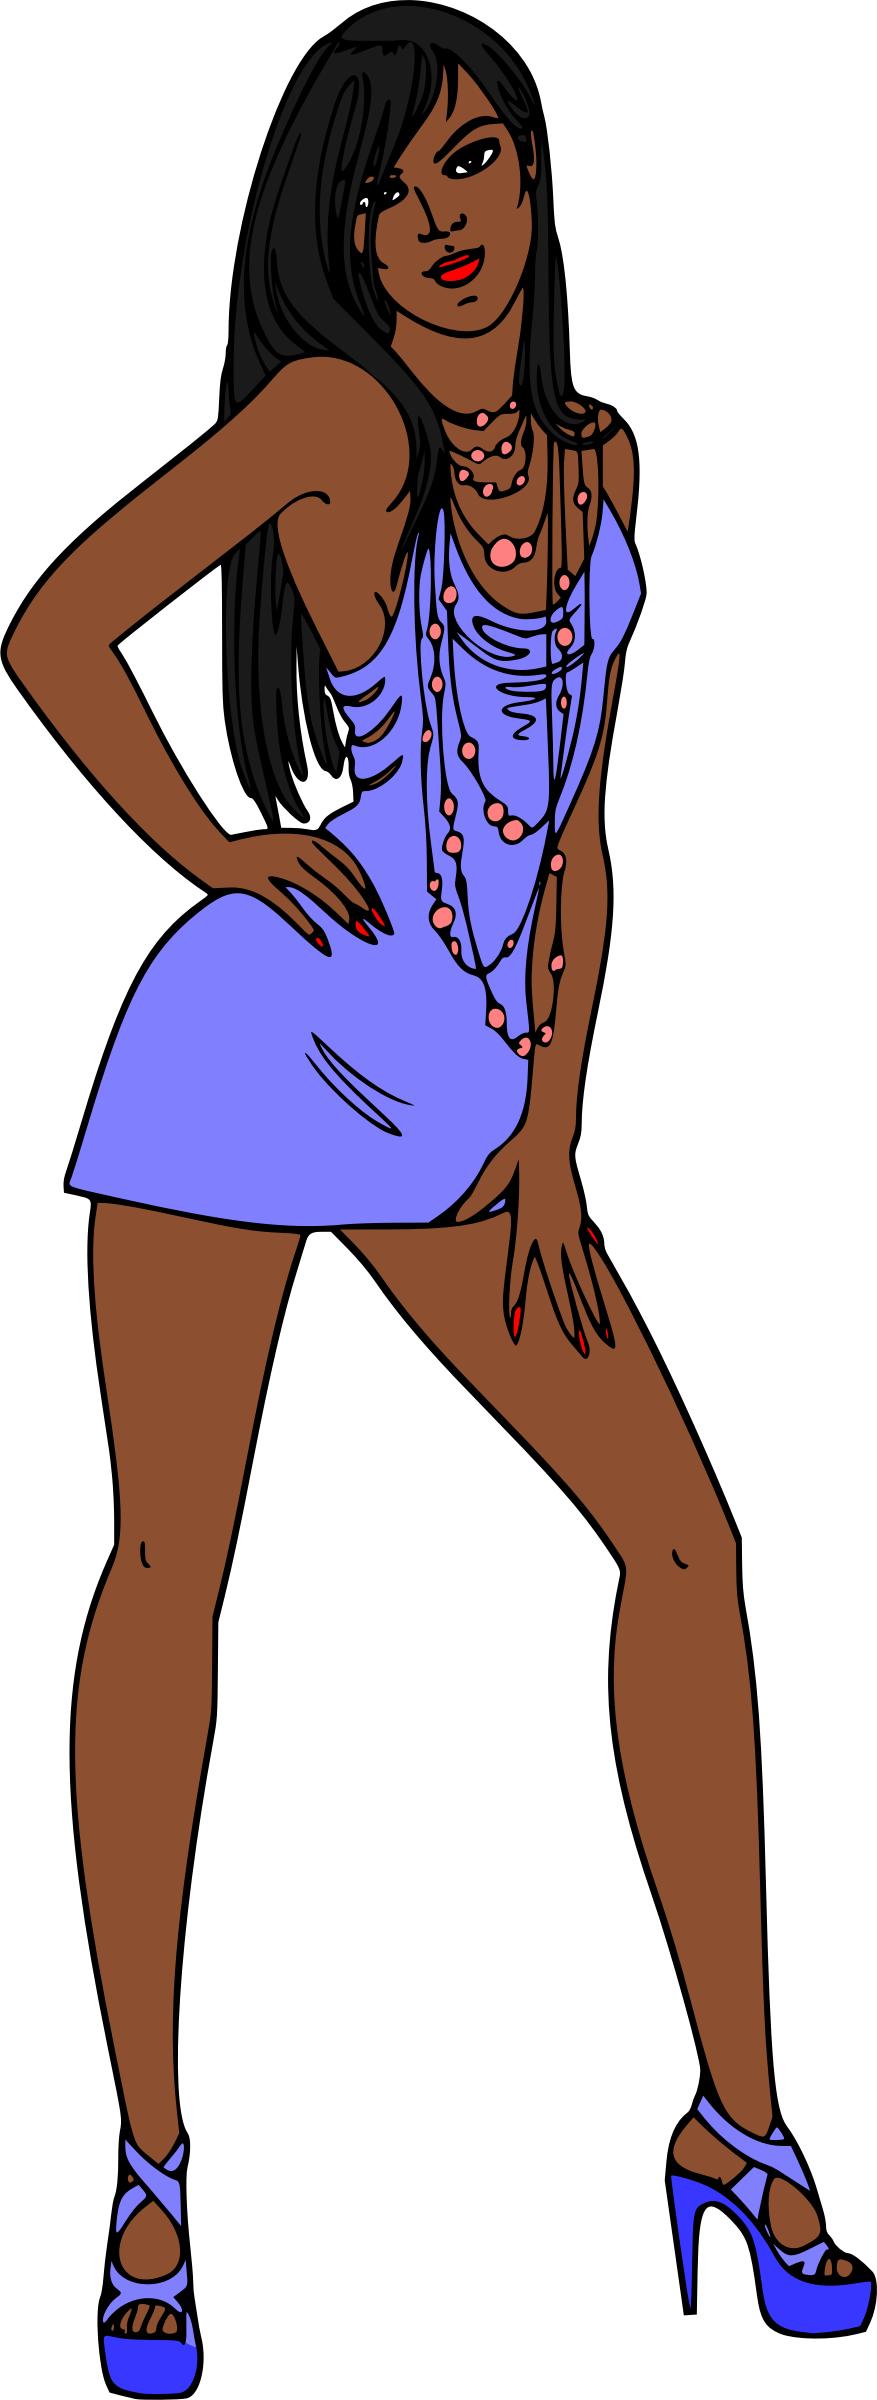 Woman in short blue dress icons